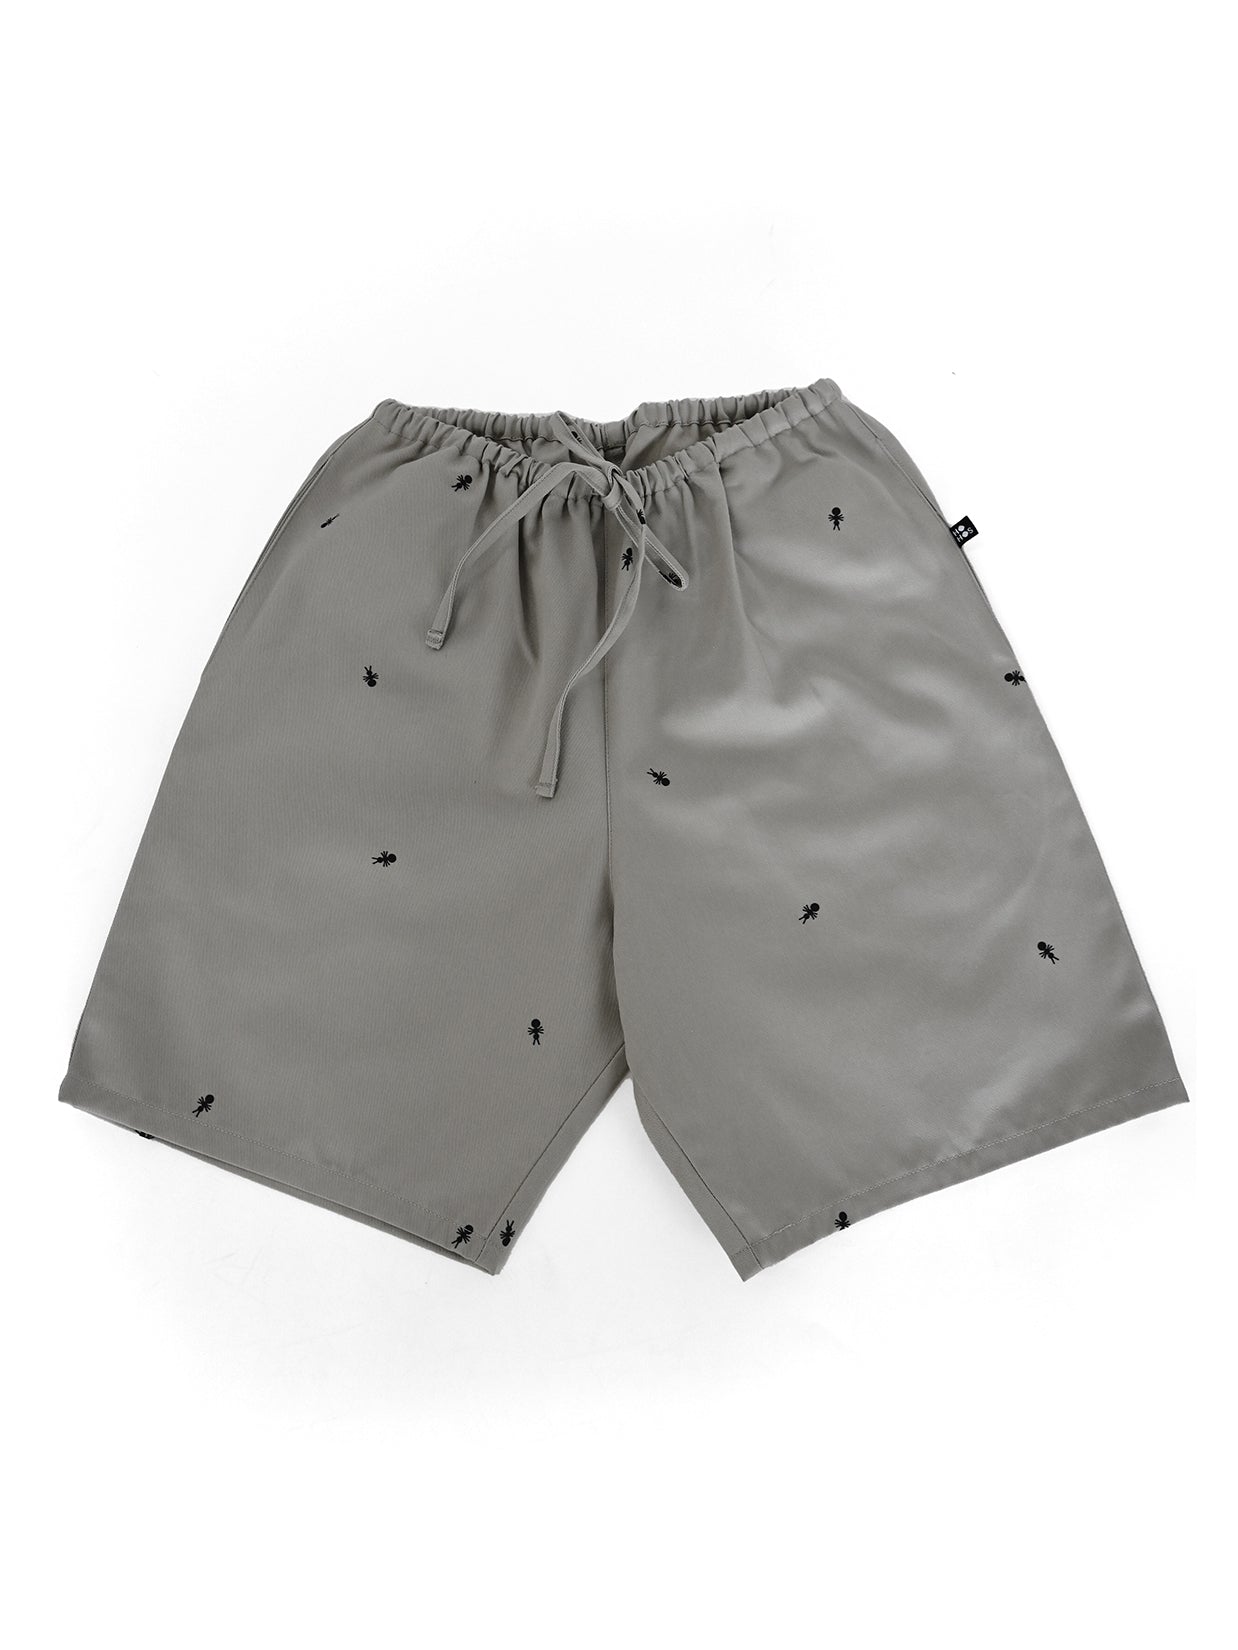 HO HOS HOLE IN THE WALL brand "Ants on Your Pants" Shorts. Design by Natali Koromoto. Pearl Grey colorway